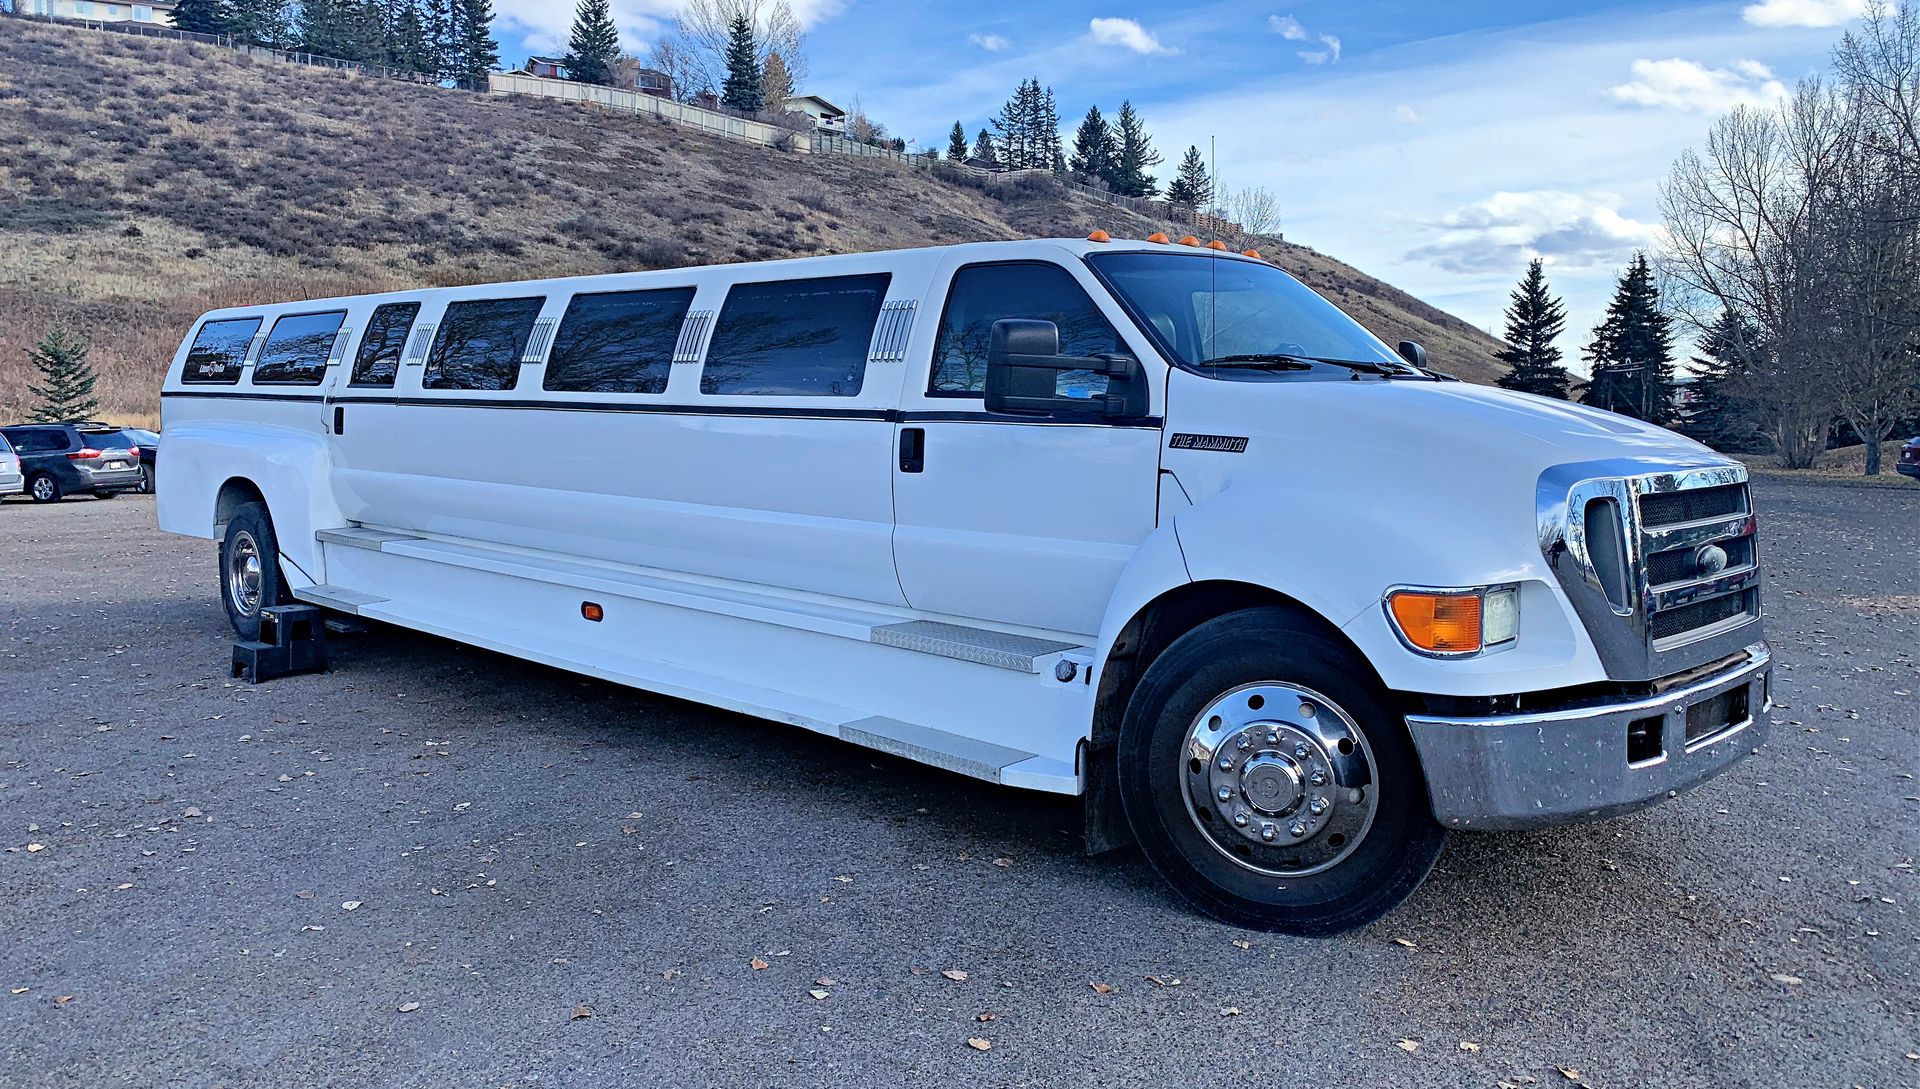 Limo To Go stretch truck Mammoth F650 limousine exterior view